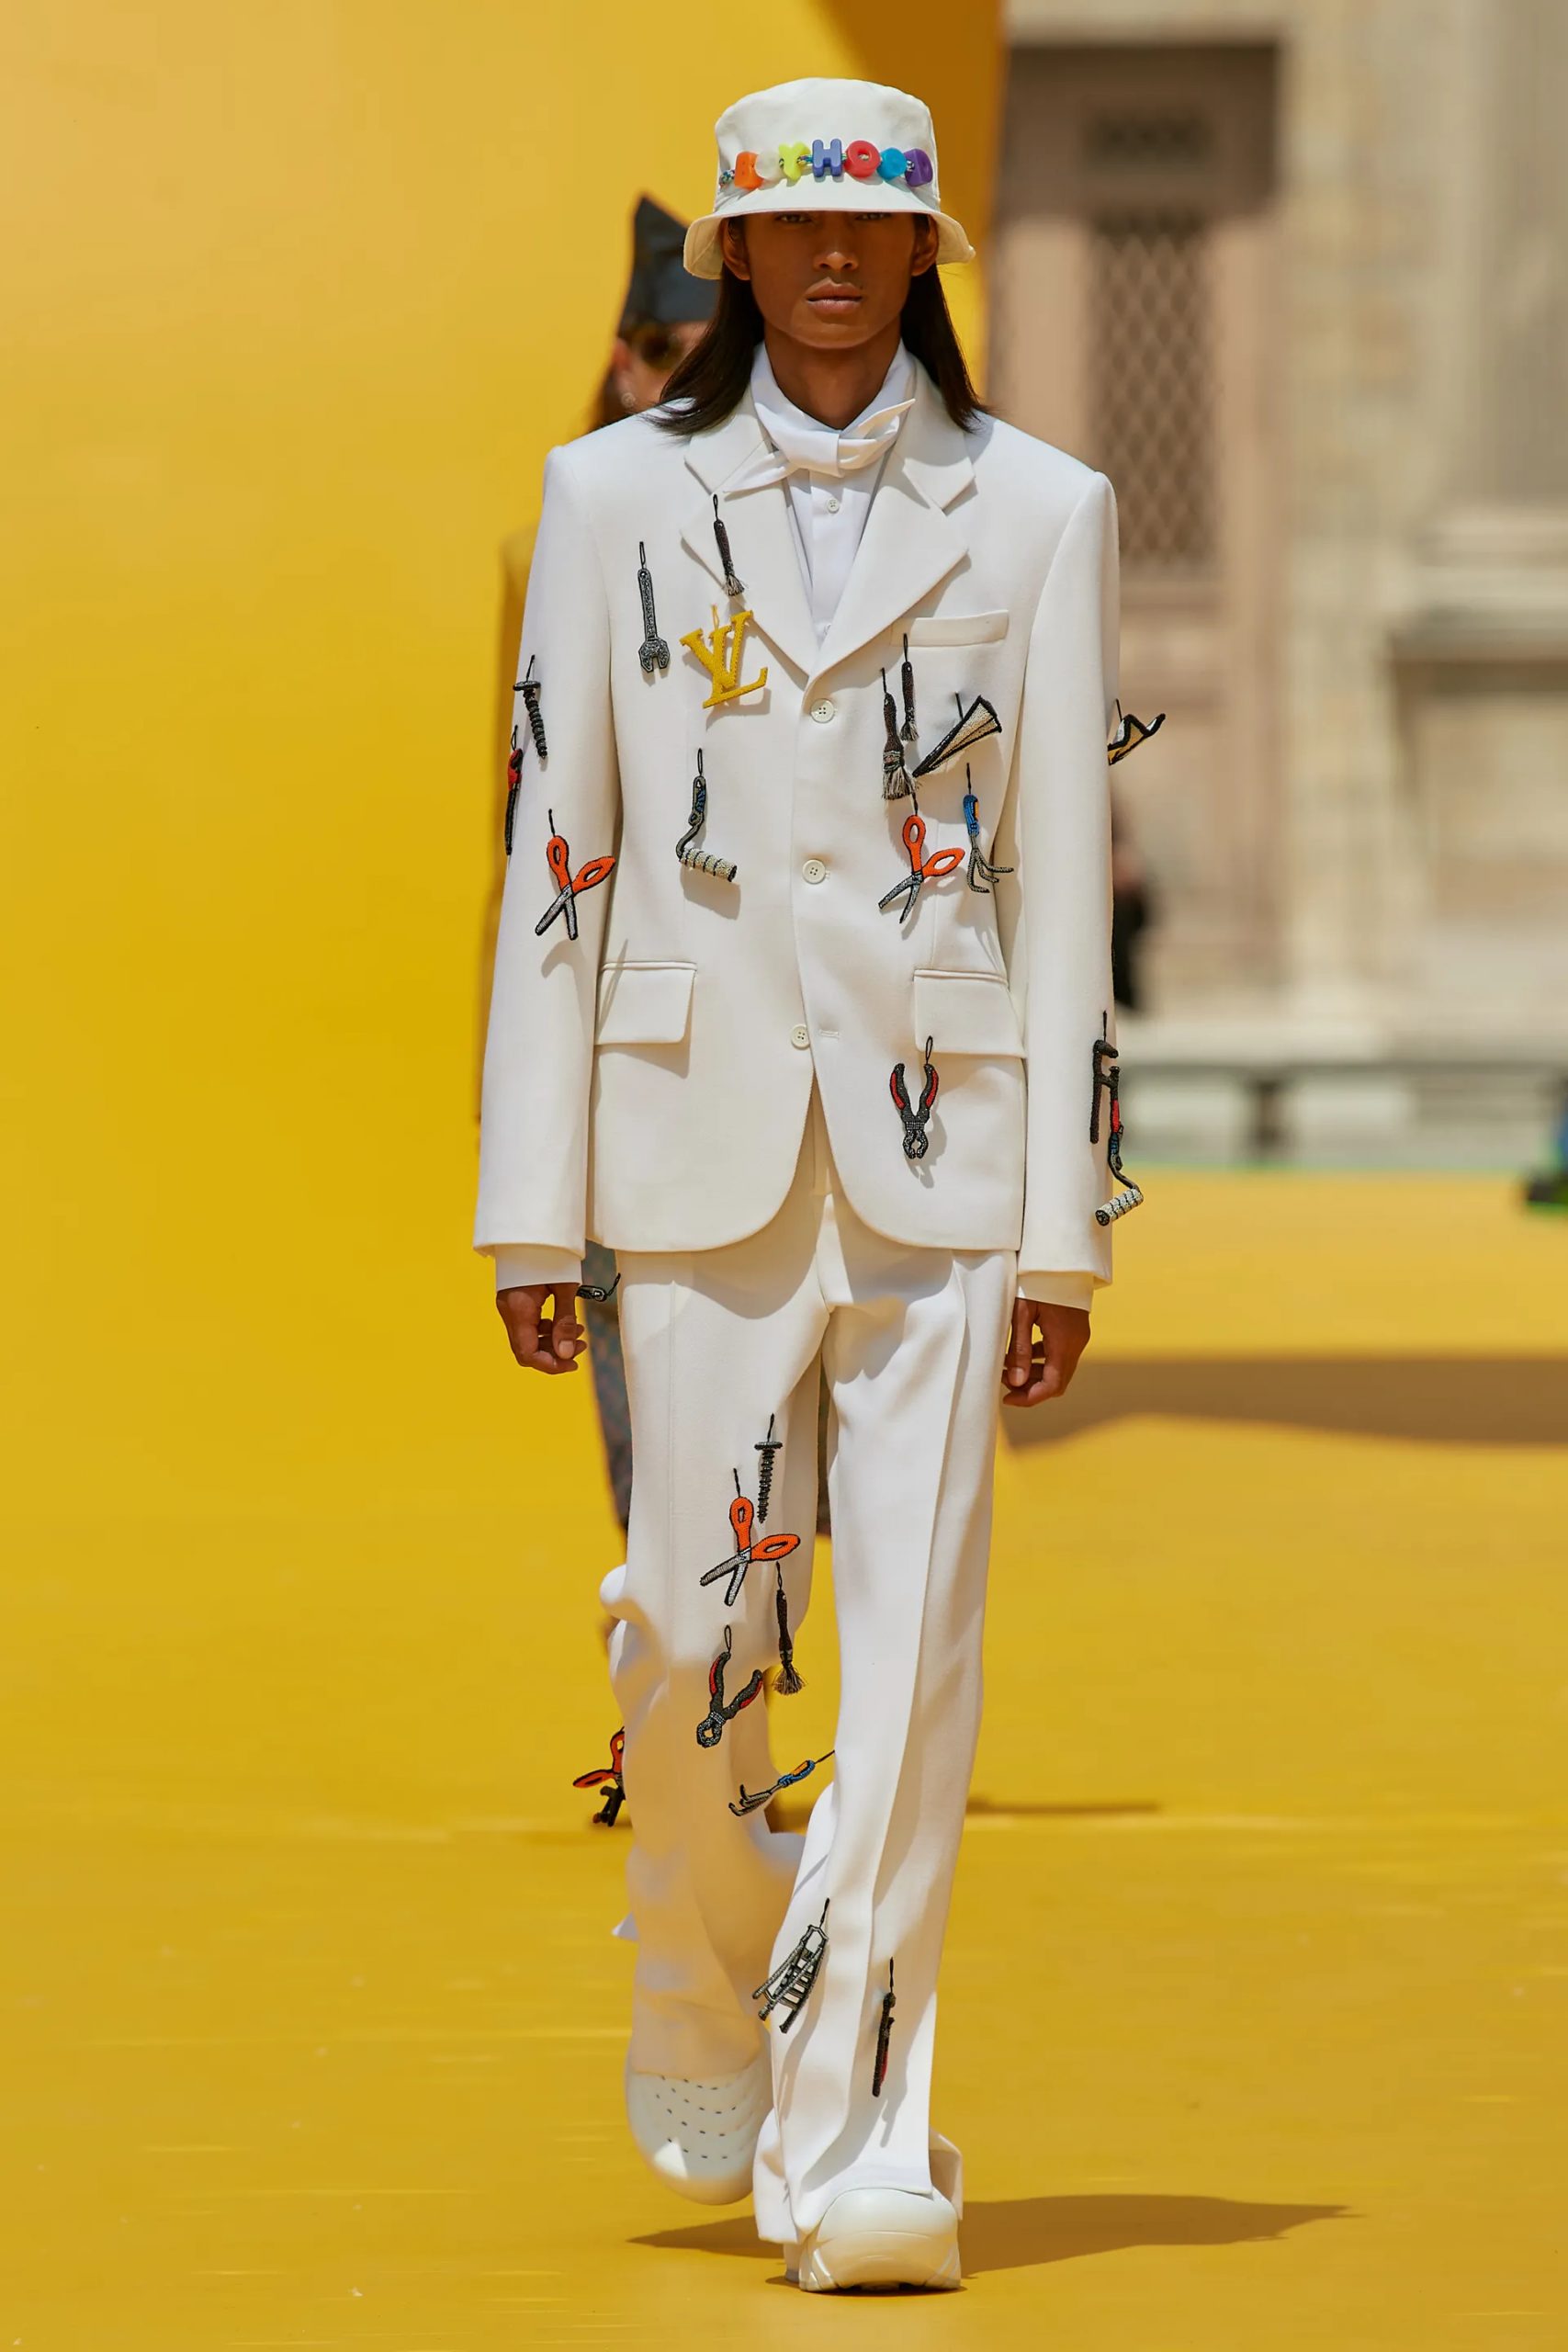 The Louis Vuitton Men's Spring Summer 2023 Show Uplifts by Upcycling